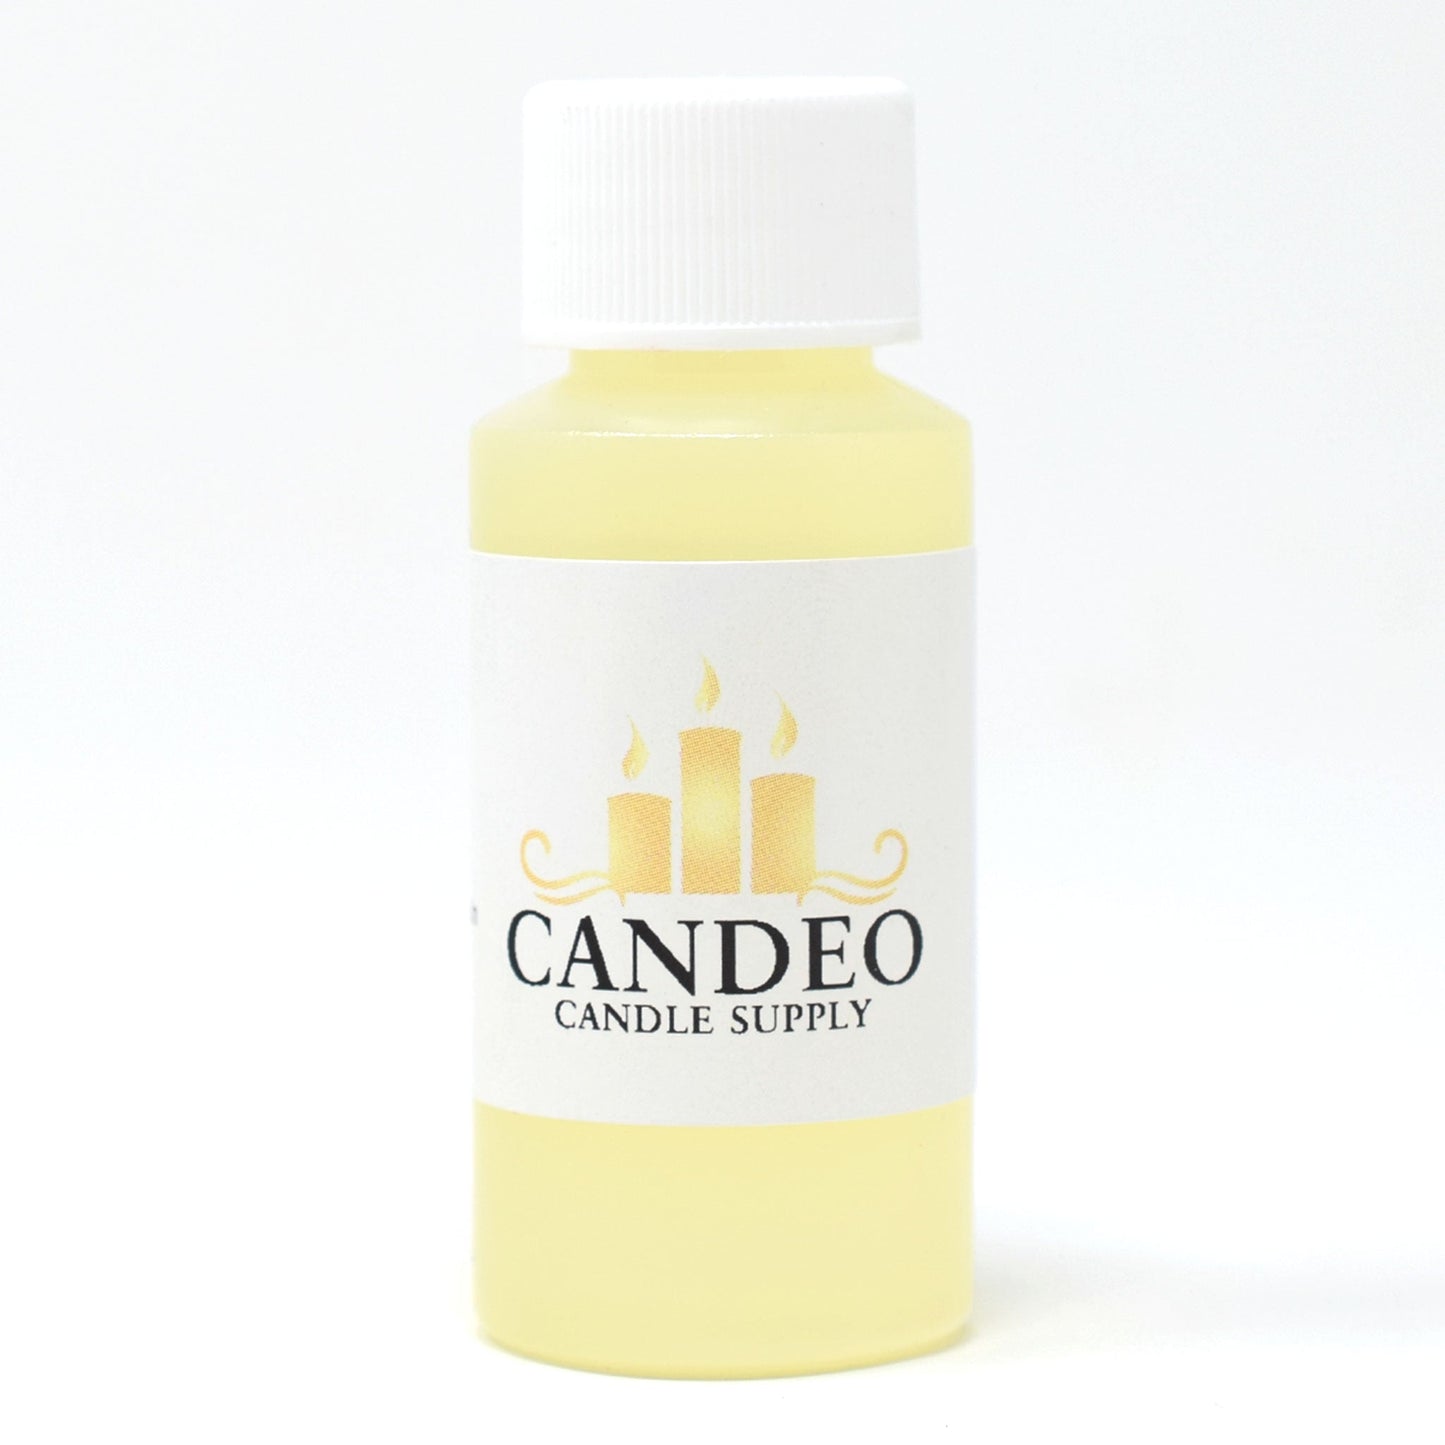 Colonial Bayberry Fragrance Oil - Candeo Candle Supply